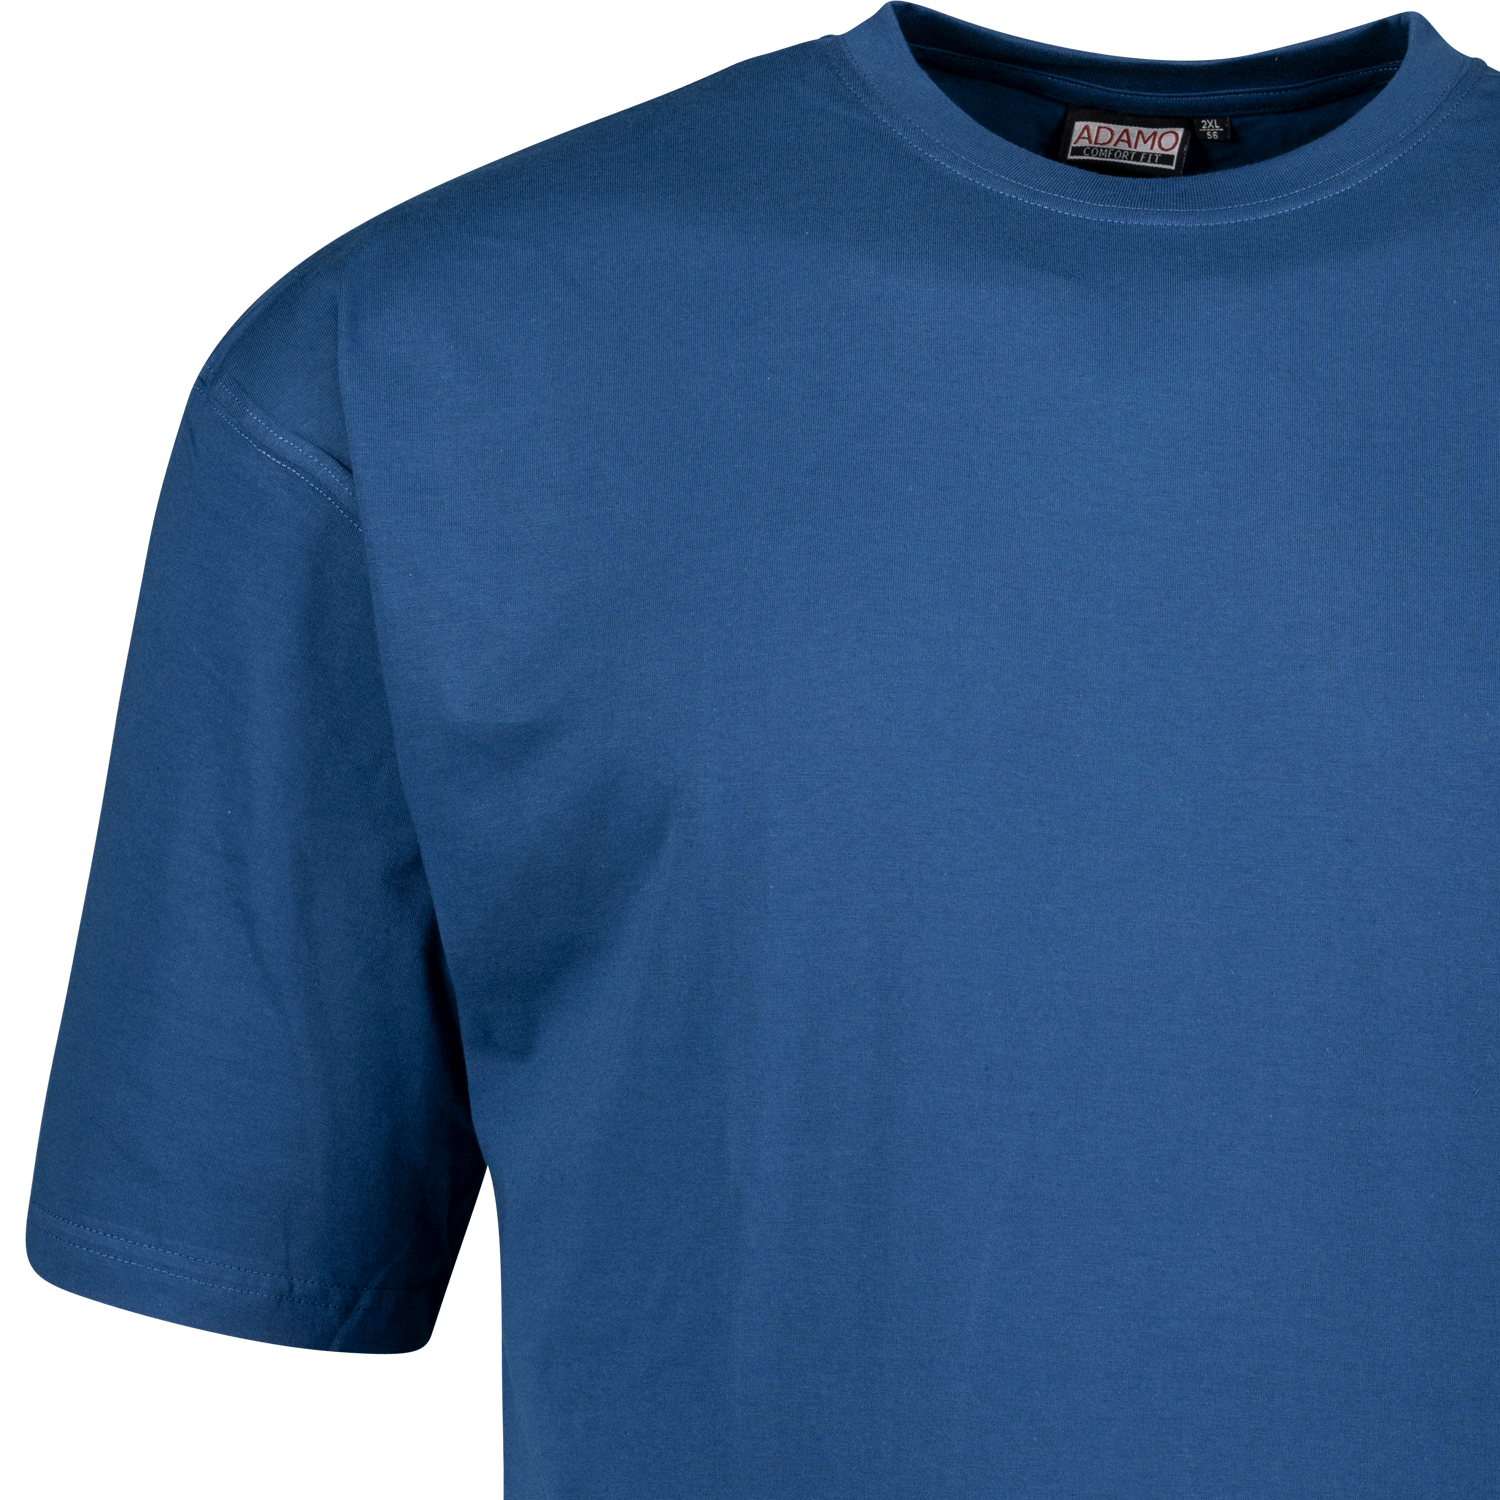 T-shirt in denim blue with round neck Tall Fit extra long series Magic by Adamo in long sizes up to 122